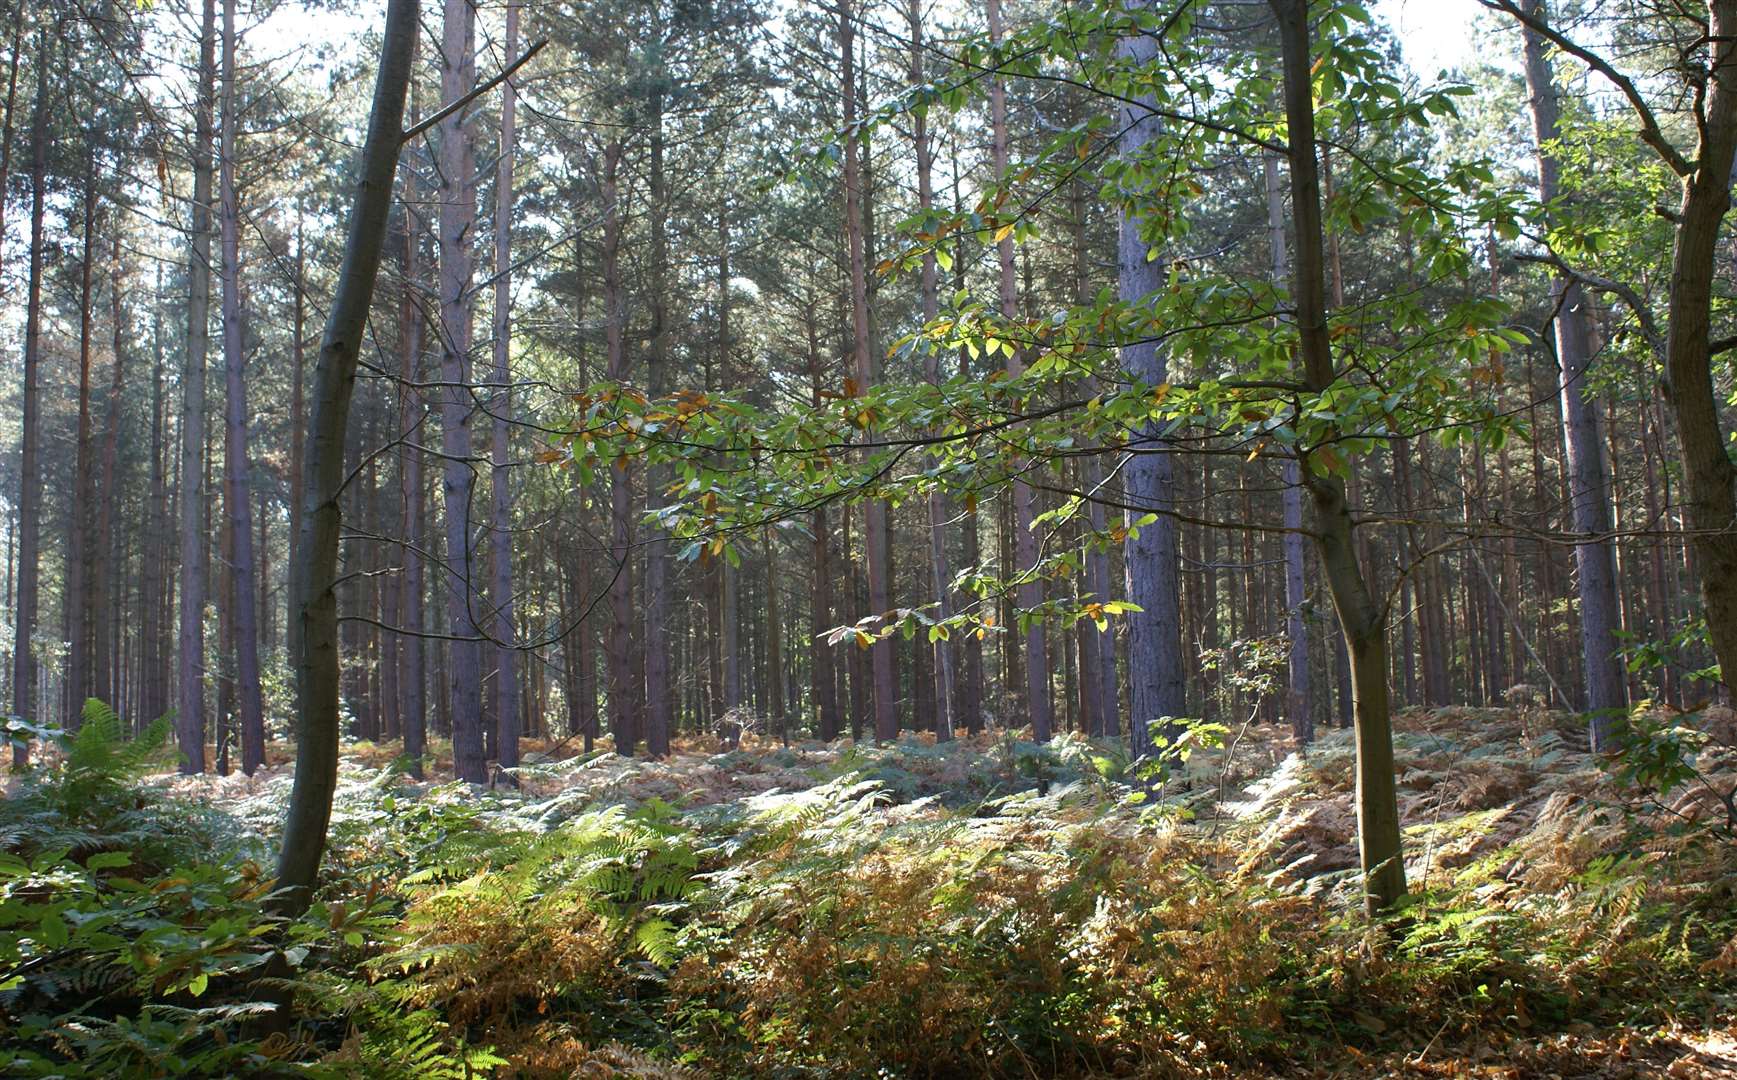 Get in touch with nature with a mental health walk through Blean Woods. Picture: Ray Lewis